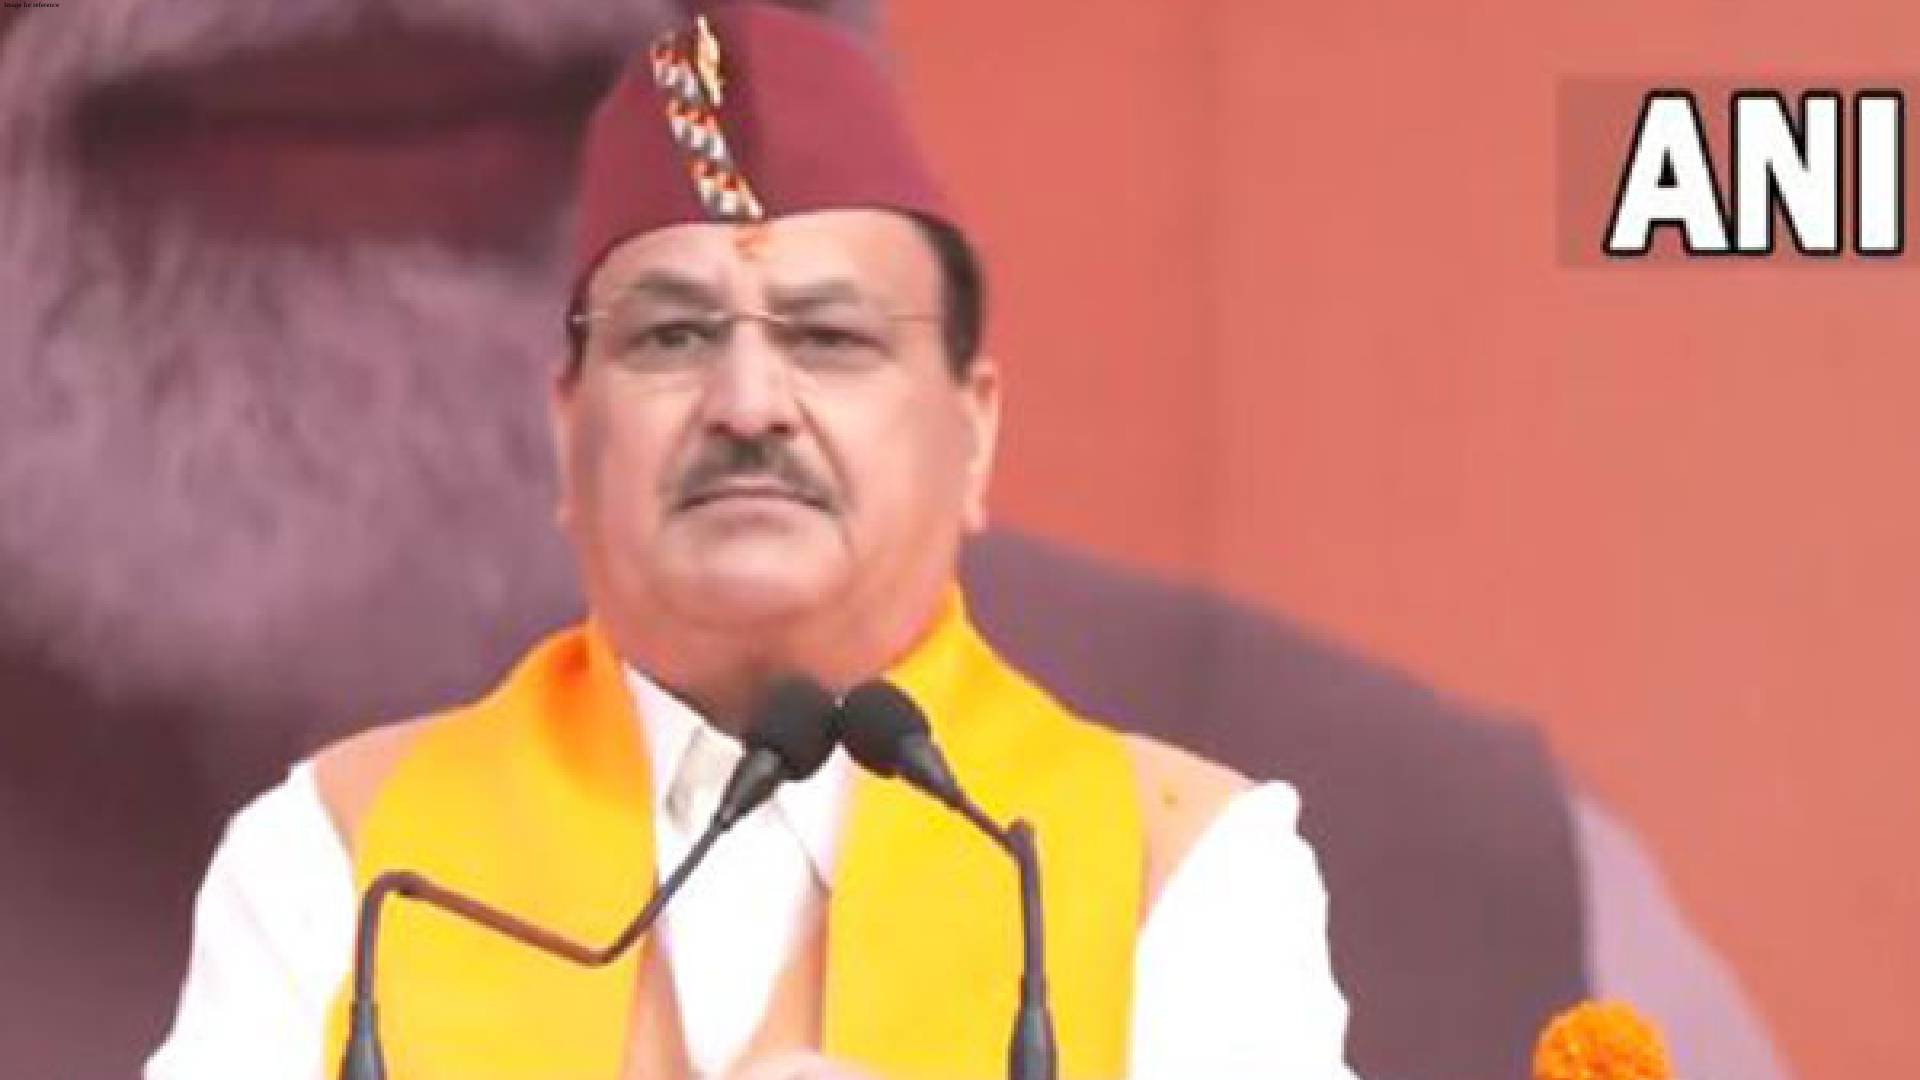 BJP govt spent Rs 1,200 crore for drinking water, Rs 64 crore for MGNREGA in Uttarakhand: BJP chief Nadda